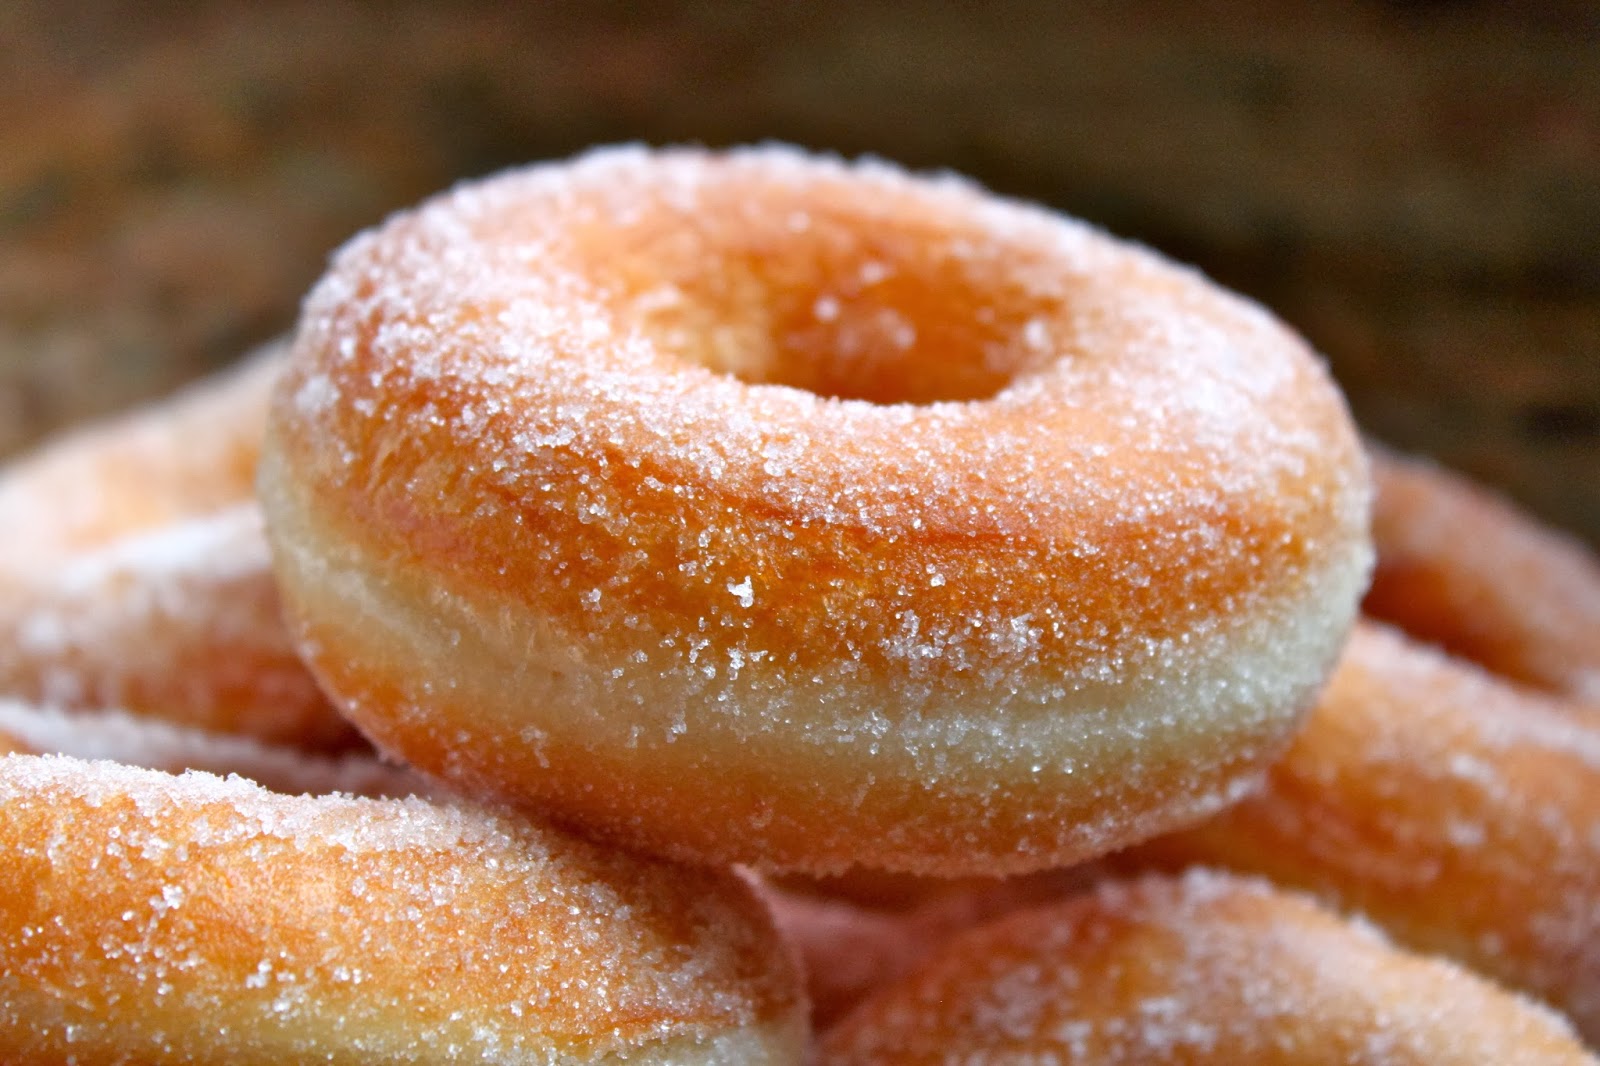 Perfect Yeast Doughnuts–Sugar, and Filled (with Jam, Nutella or Cream)